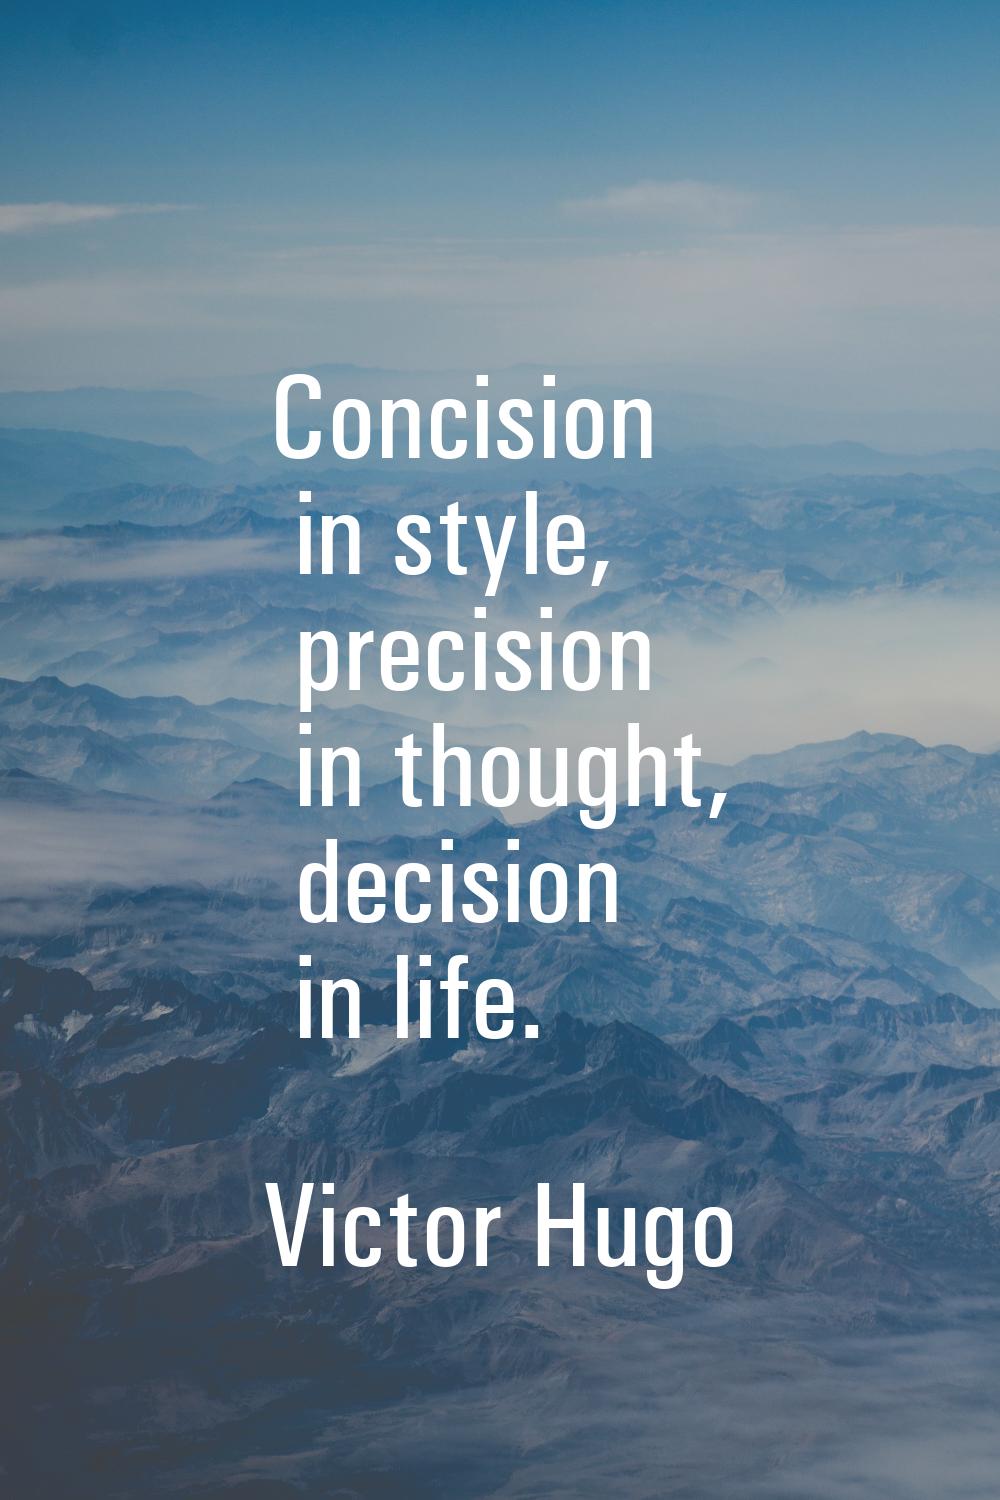 Concision in style, precision in thought, decision in life.